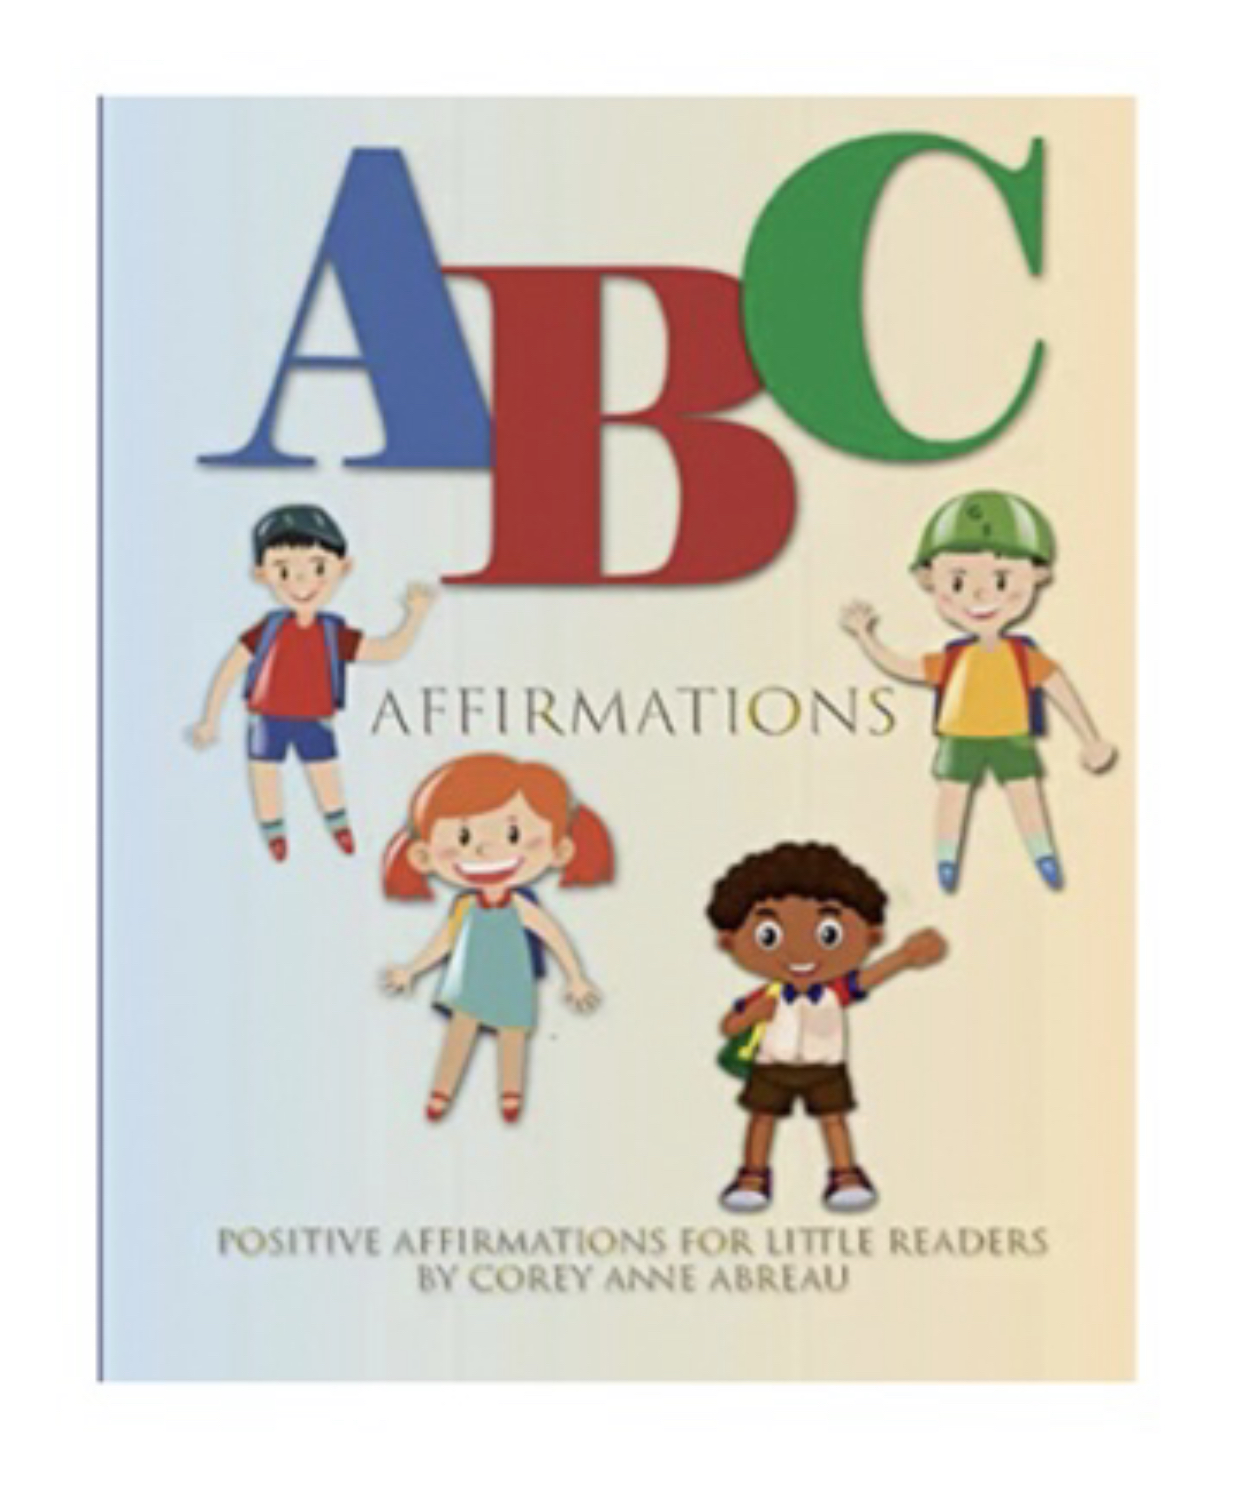 Abc Affirmations - check out our free ebook if you have kindle